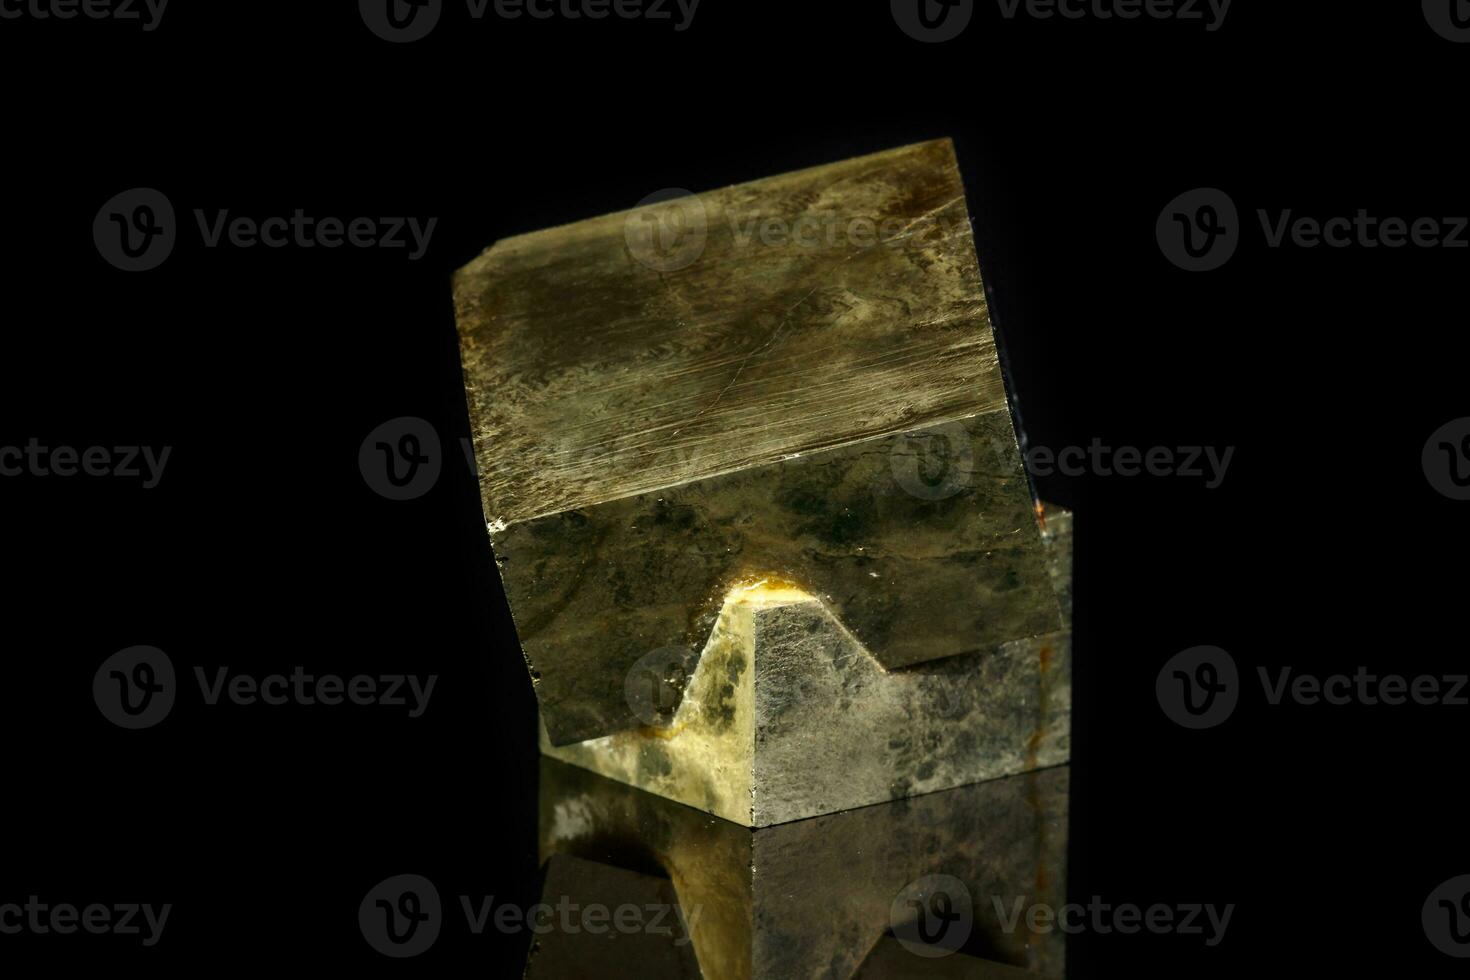 Macro mineral stone Pyrite on a black background photo